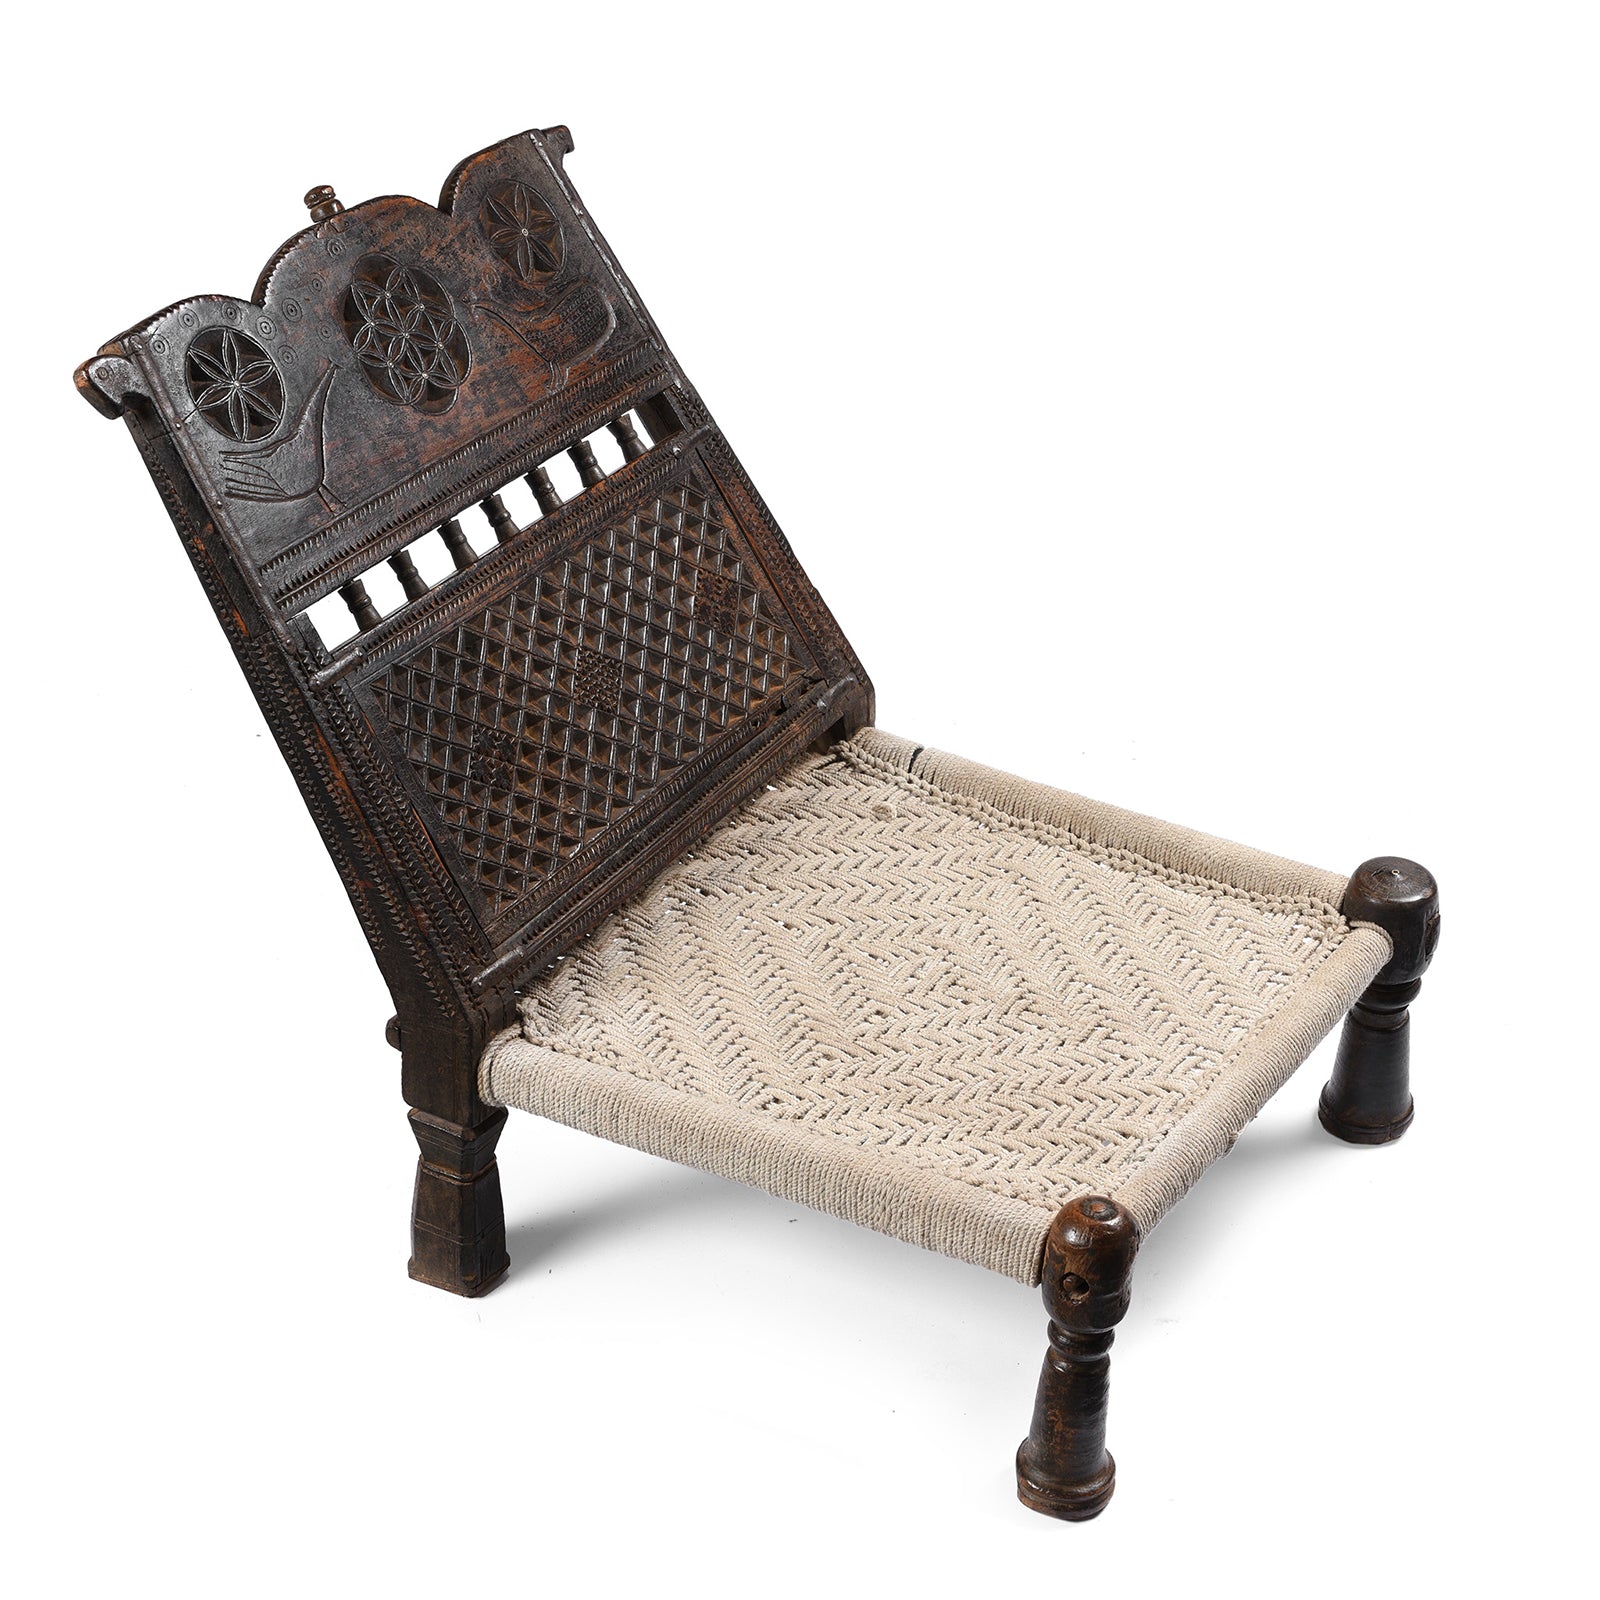 Antique Chip Carved Low Pidha Chair From Rajasthan - 19th Century | INDIGO ANTIQUES